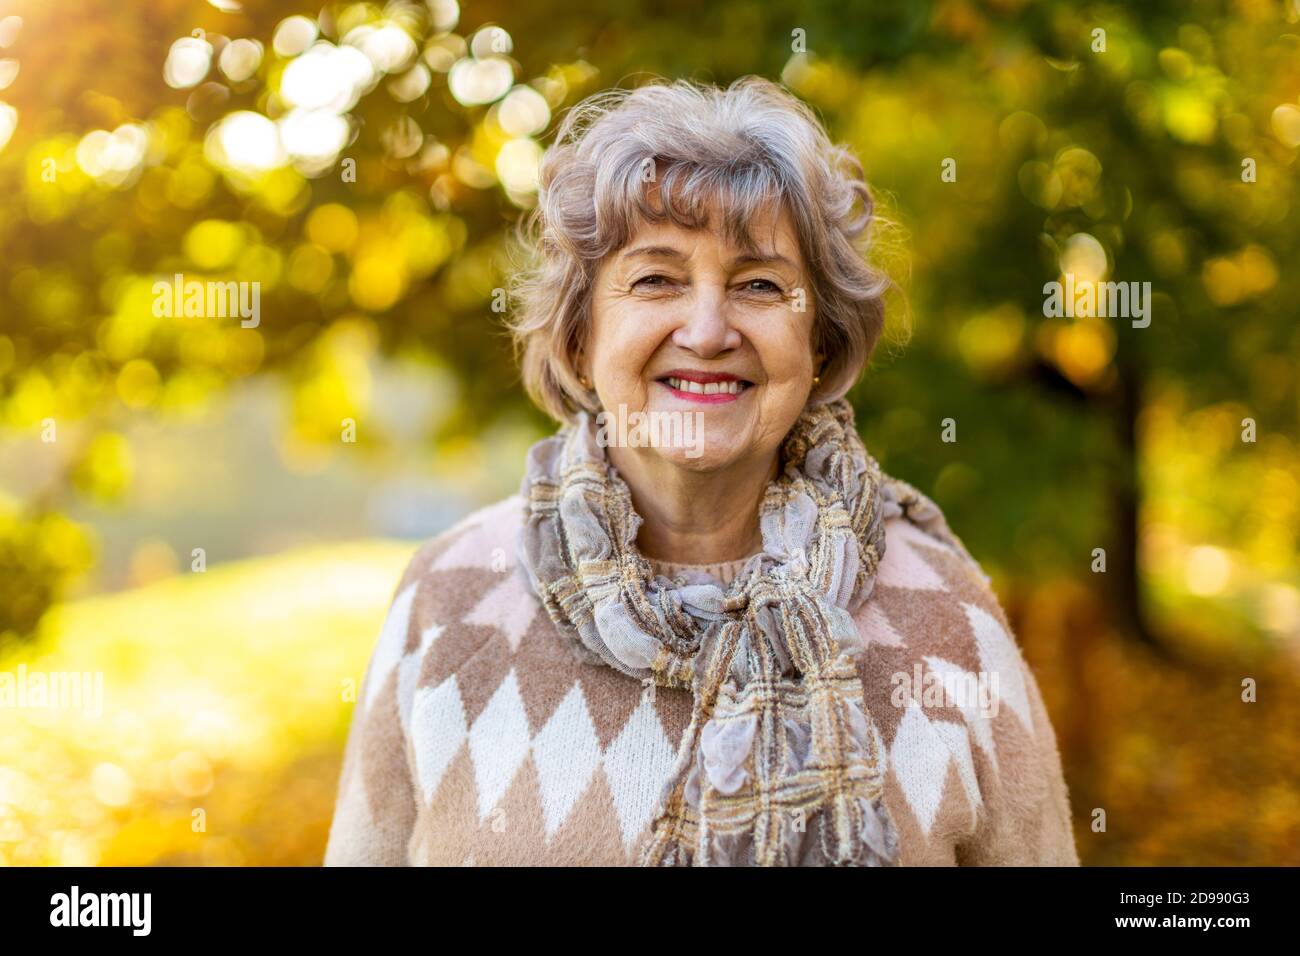 Portrait of a happy senior woman outdoors in autumn Stock Photo